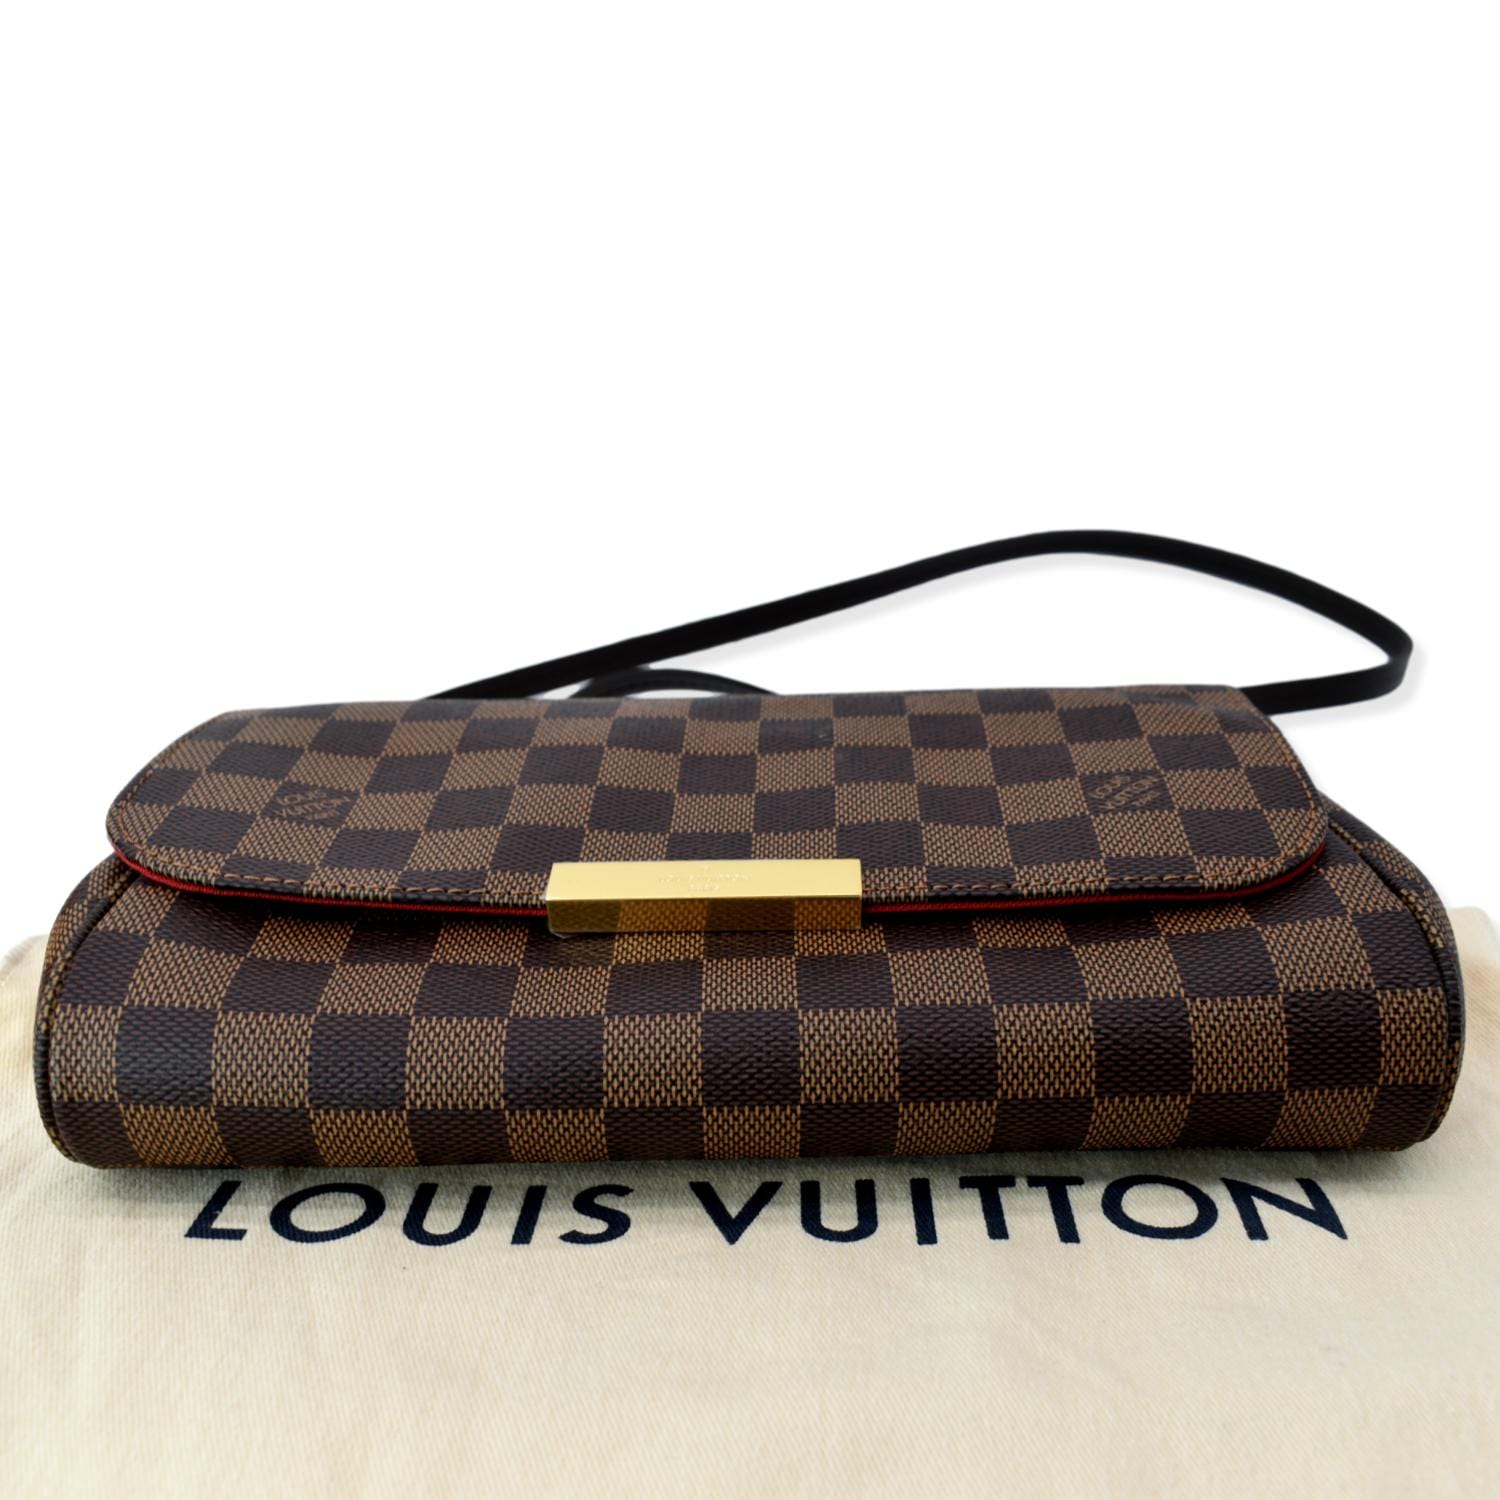 Louis Vuitton Iéna MM- Questions Answered 